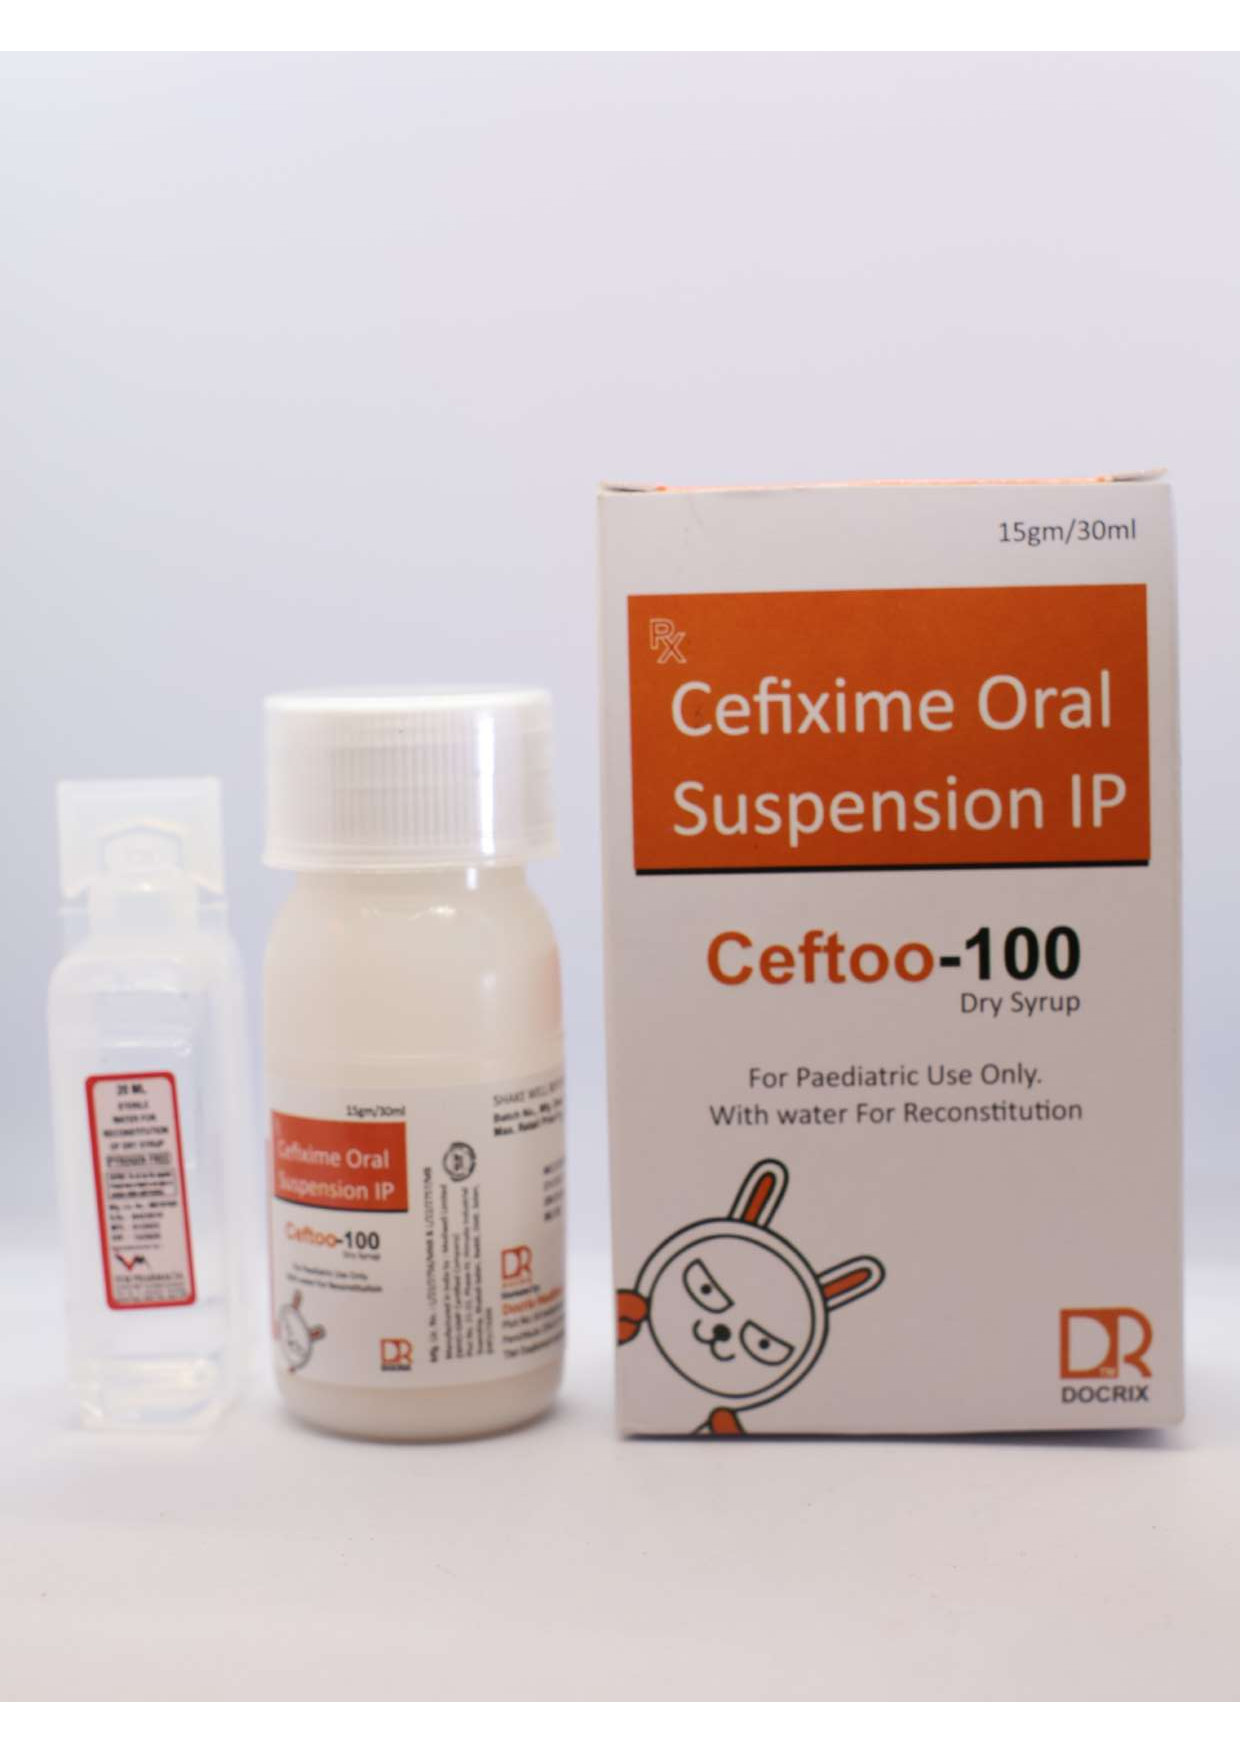 Product Name: Ceftoo 100, Compositions of Ceftoo 100 are Cefixime Oral Suspension IP  - Docrix Healthcare